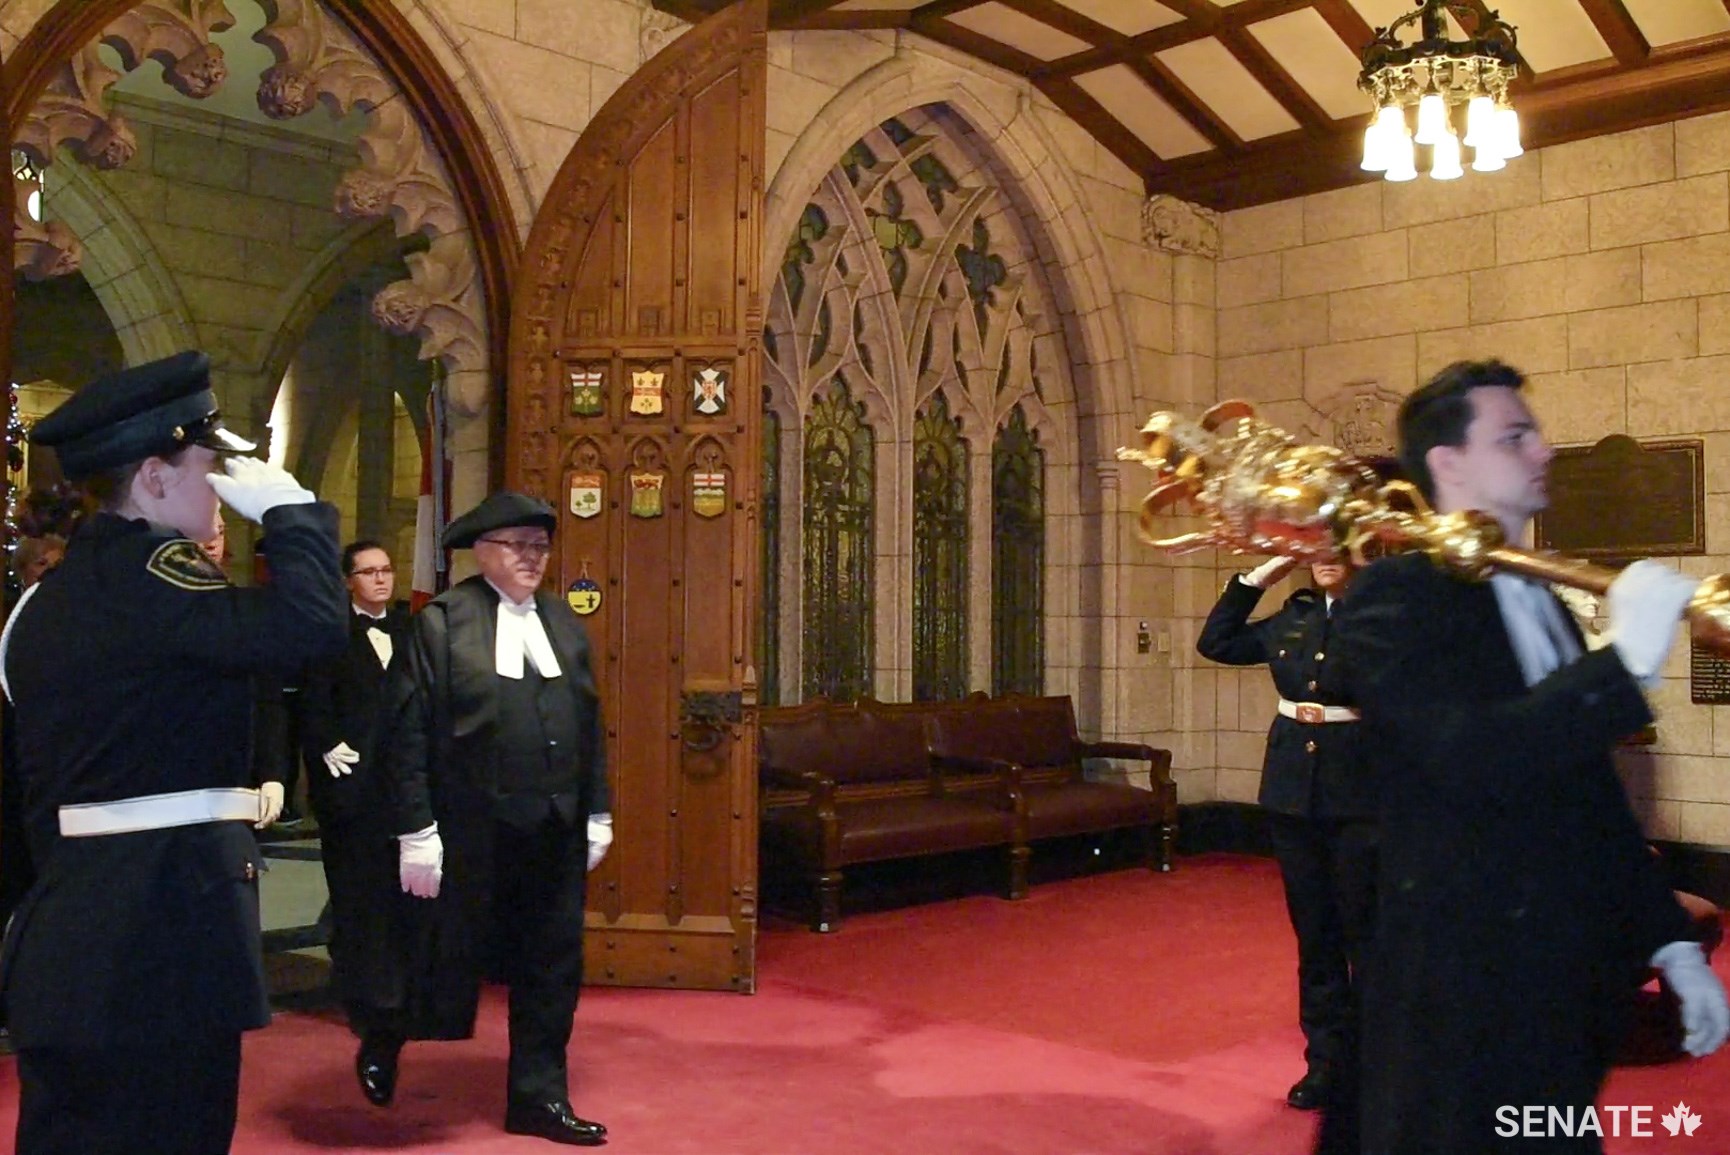 Speaker of the Senate George J. Furey enters the Red Chamber to preside over the last sitting of the Senate on Parliament Hill for at least a decade.